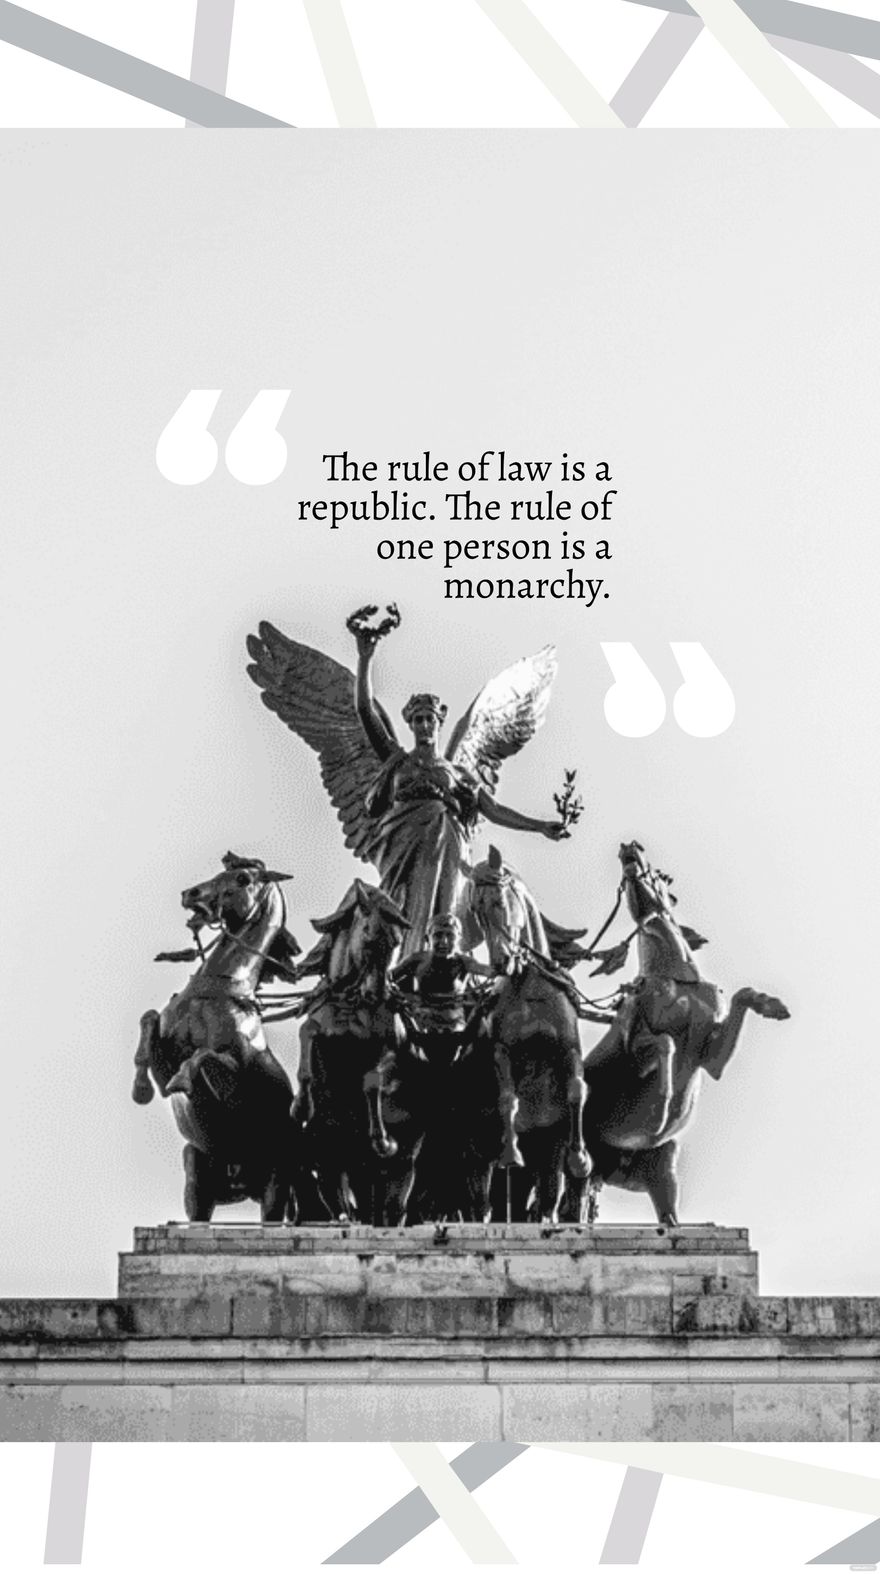 Free The rule of law is a republic. The rule of one person is a monarchy. - Lee Zeldin in JPEG